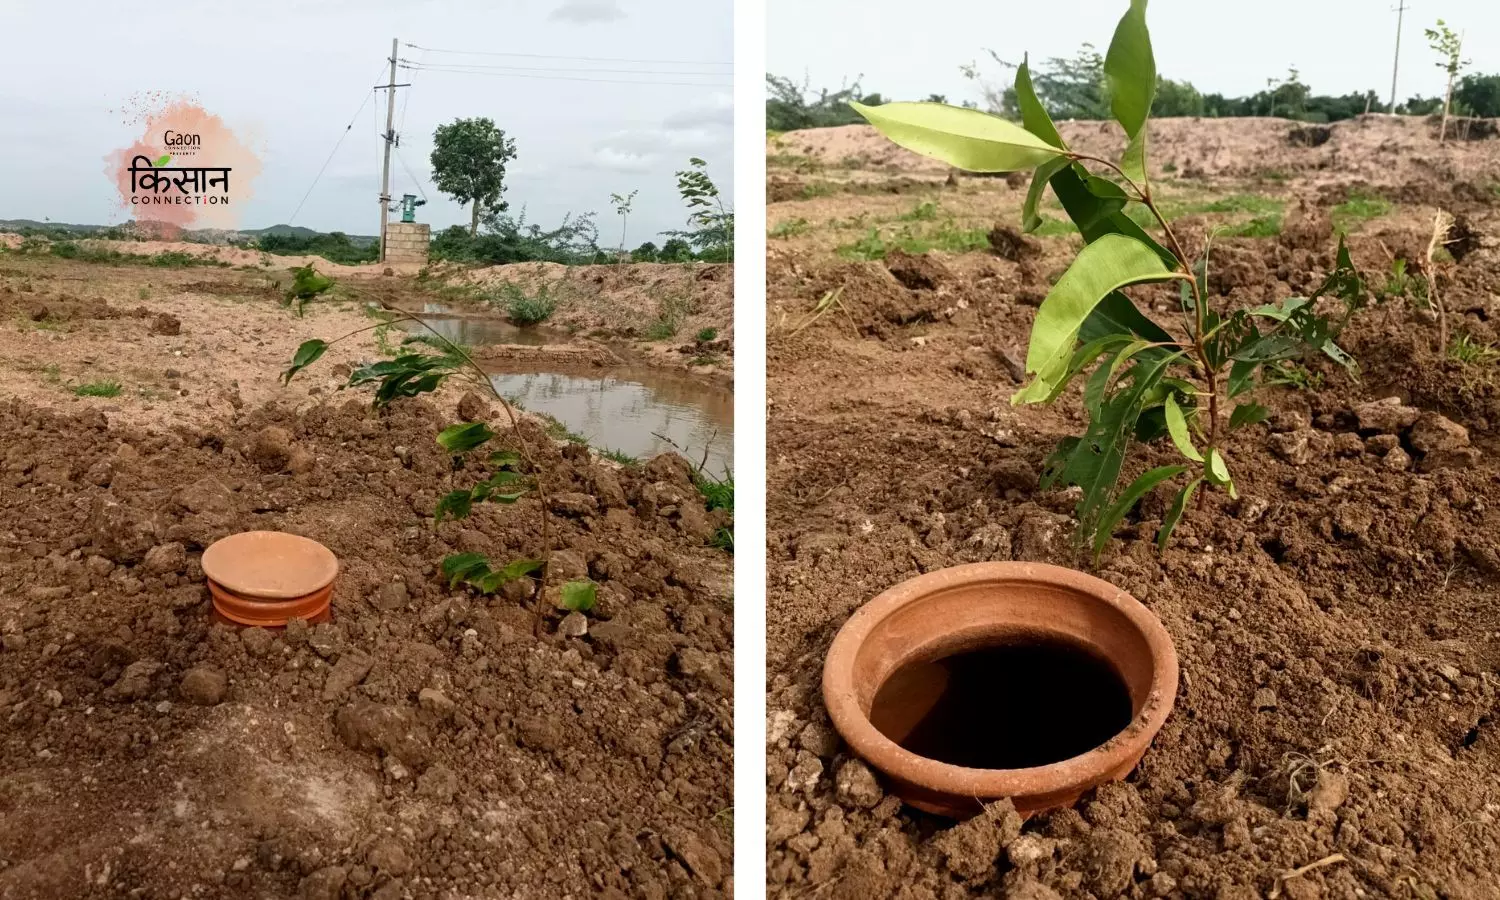 Pots Show The Way: A 2,000-yo Irrigation System Is Being Revived In North Karnataka